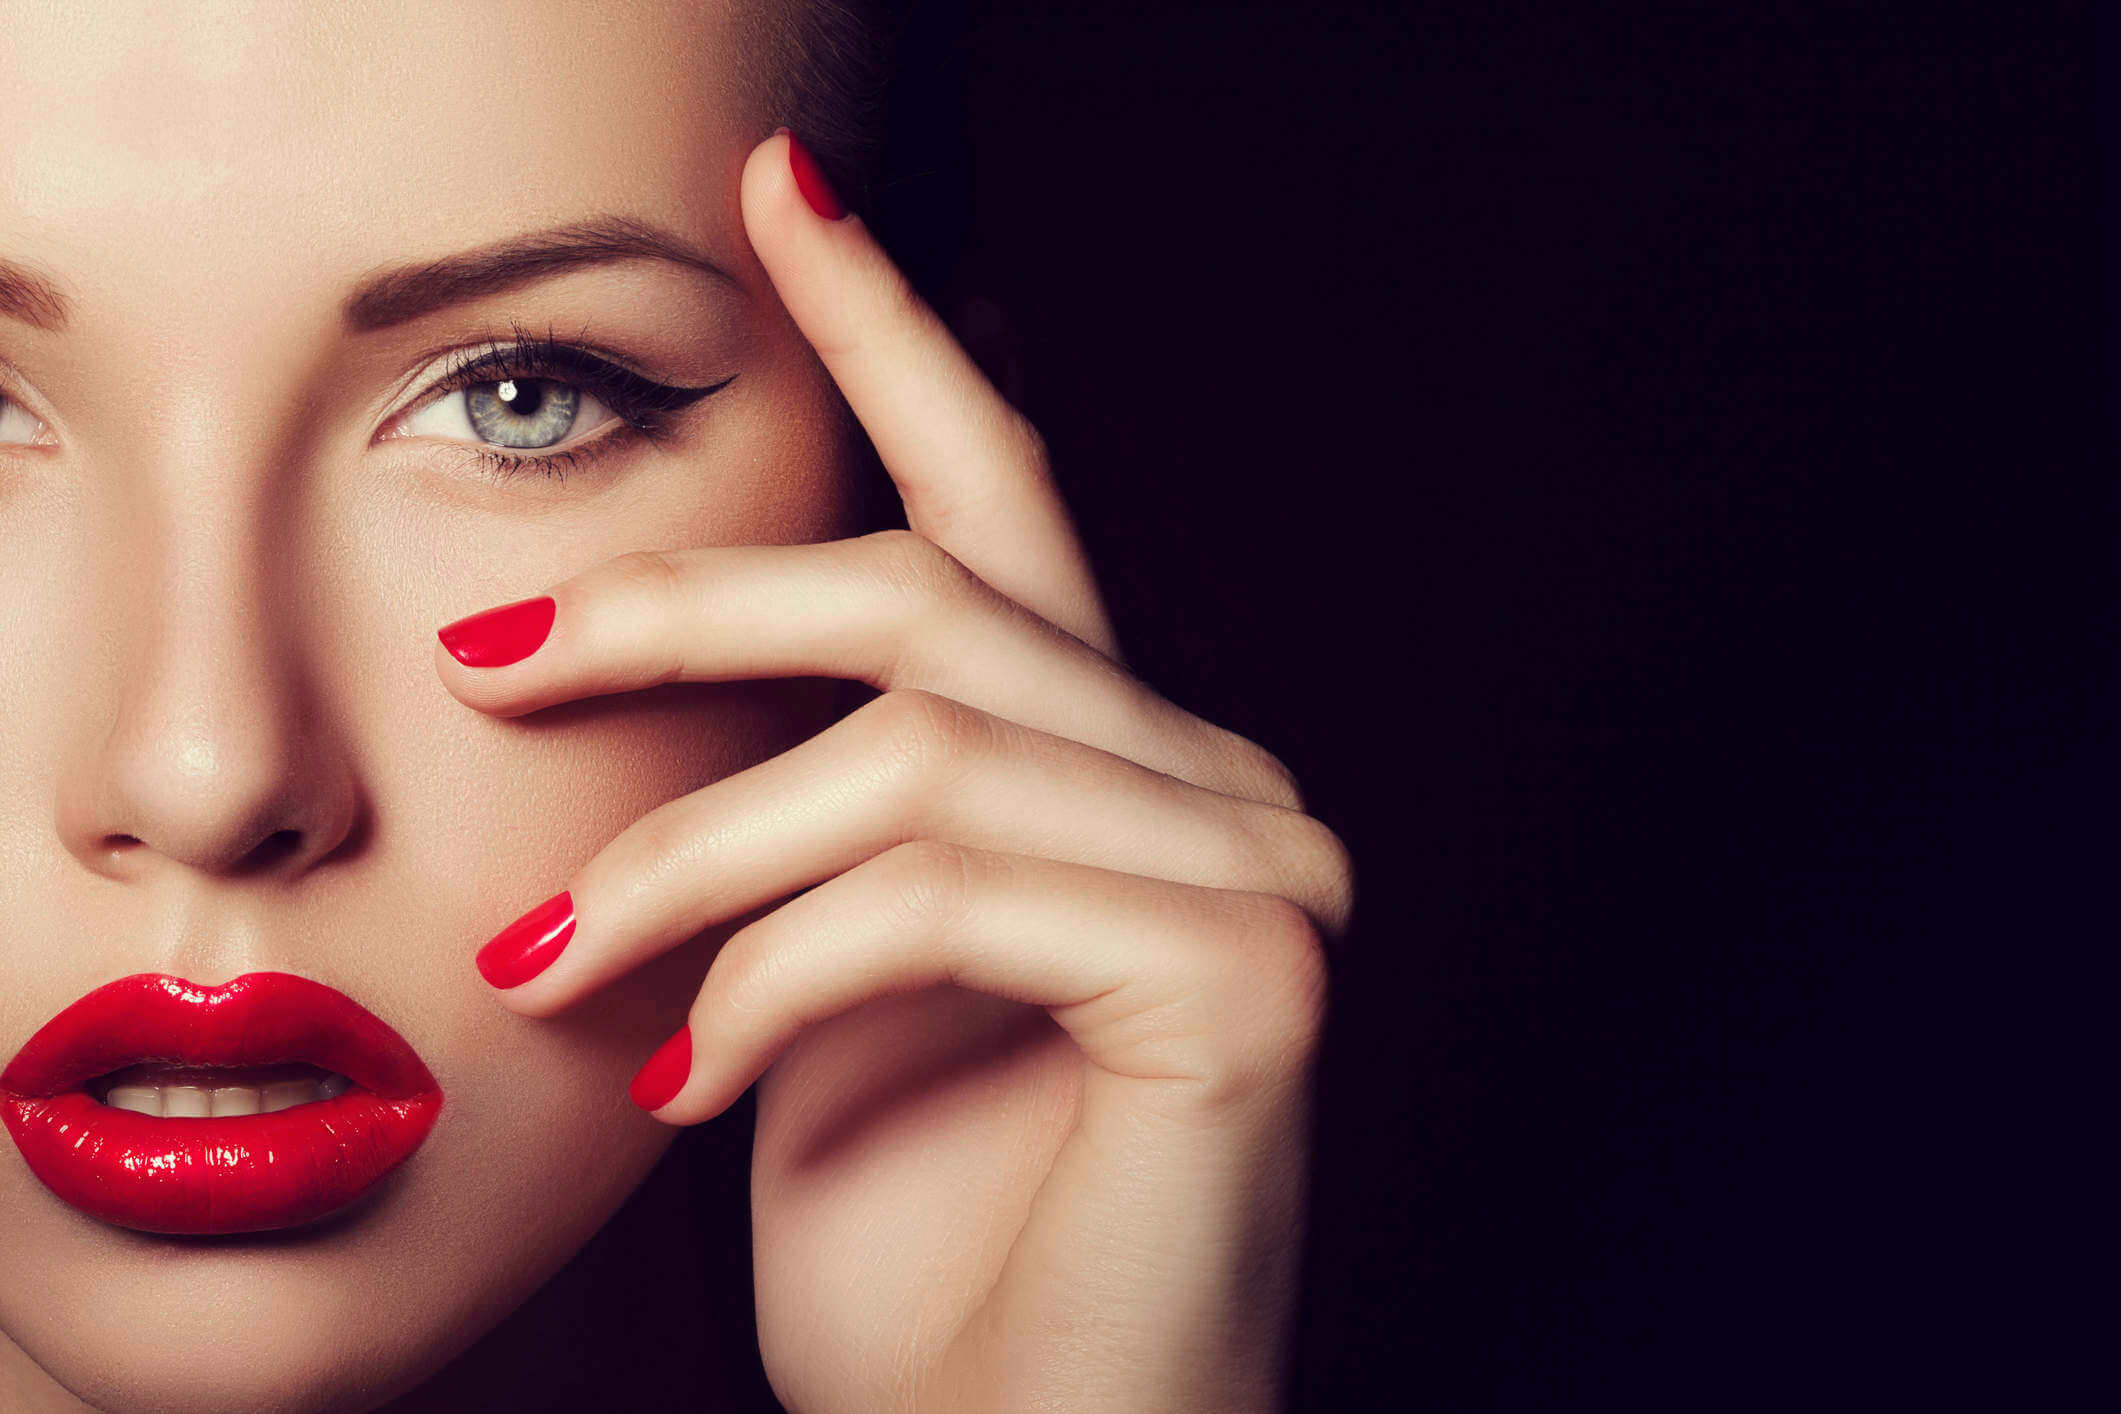 PERMANENT MAKEUP with manicure salon toujours belle in Montreal